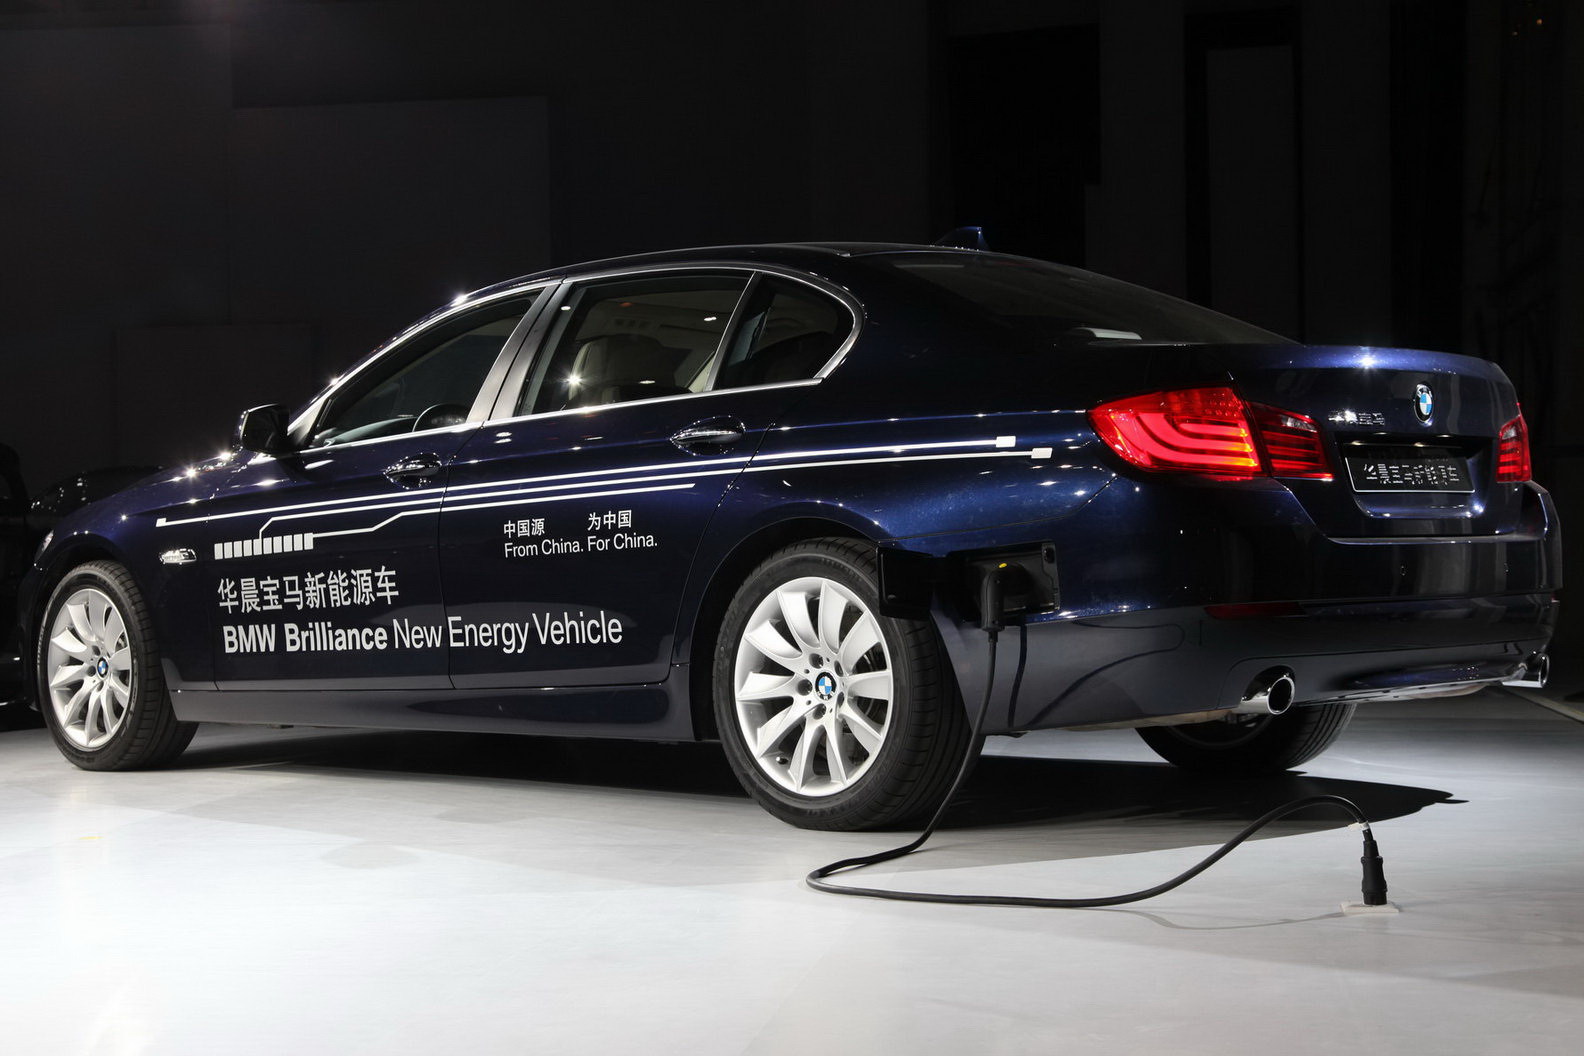 BMW displayed the 5 Series plug-in hybrid concept at Shanghai